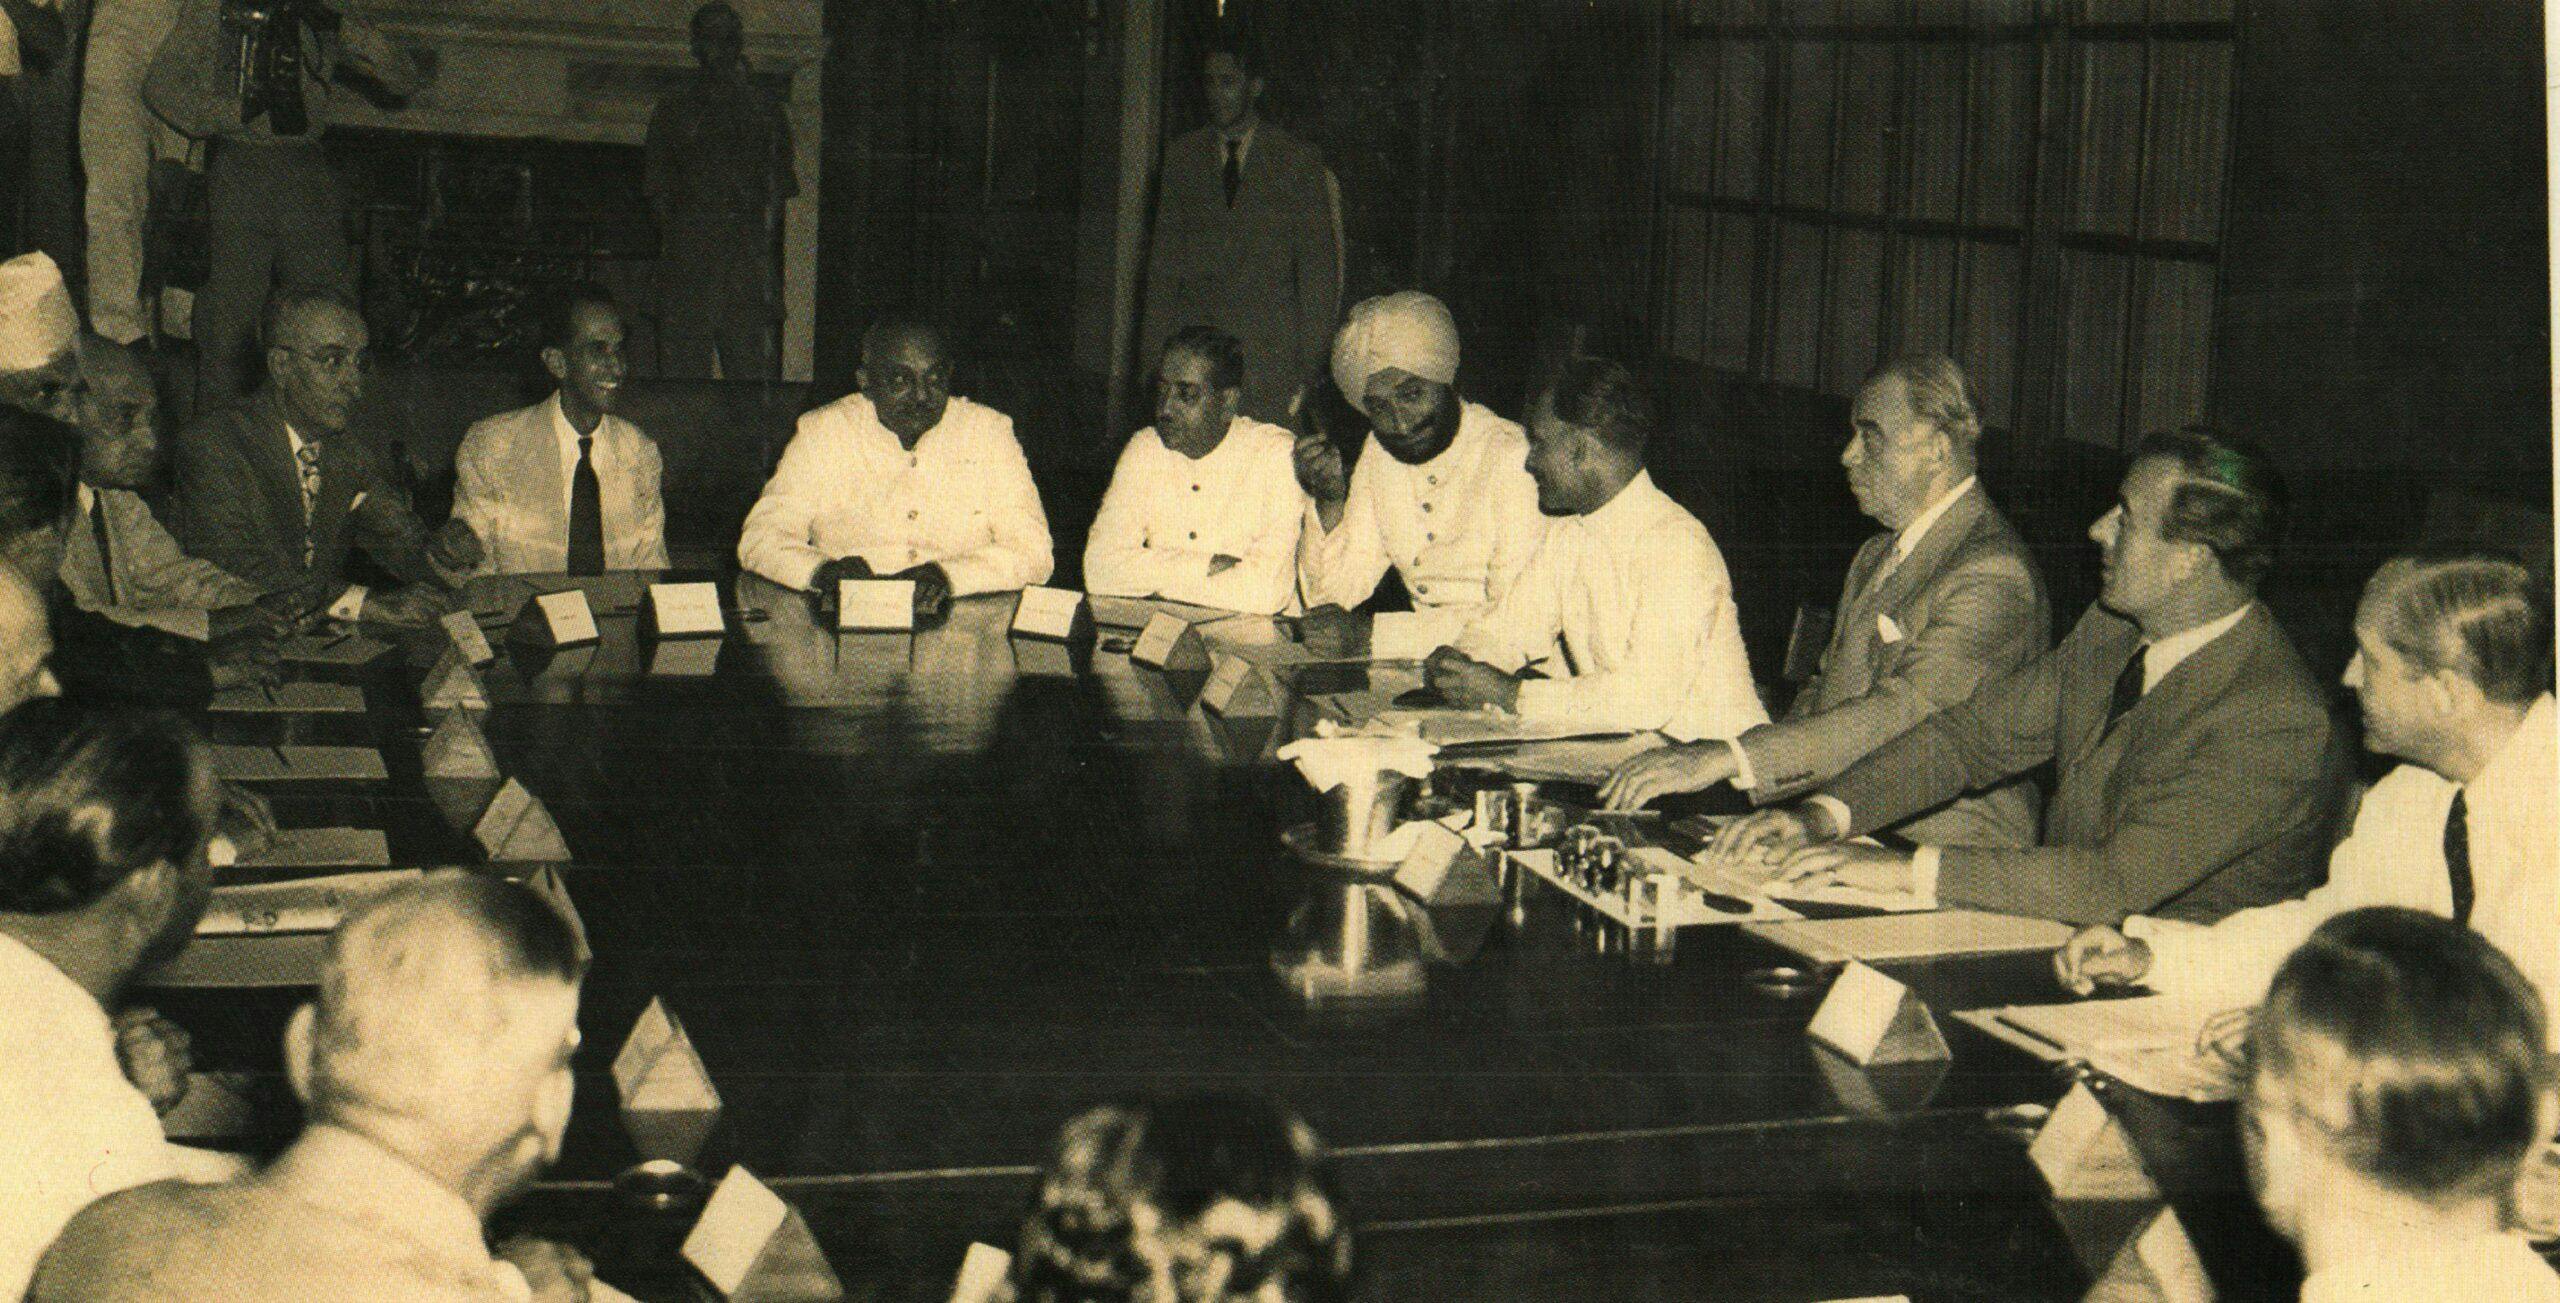 From Left to Right: Jamsaheb of Nawanagar, Maharawal of Dungarpur, Maharaja of Patiala, Nawab of Bhopal (Chancellor of Chamber of Princes), Lord Ismay, Viceroy Lord Mountbatten and Sir Conrad Corfield in a meeting of the princes on June 3, 1947 